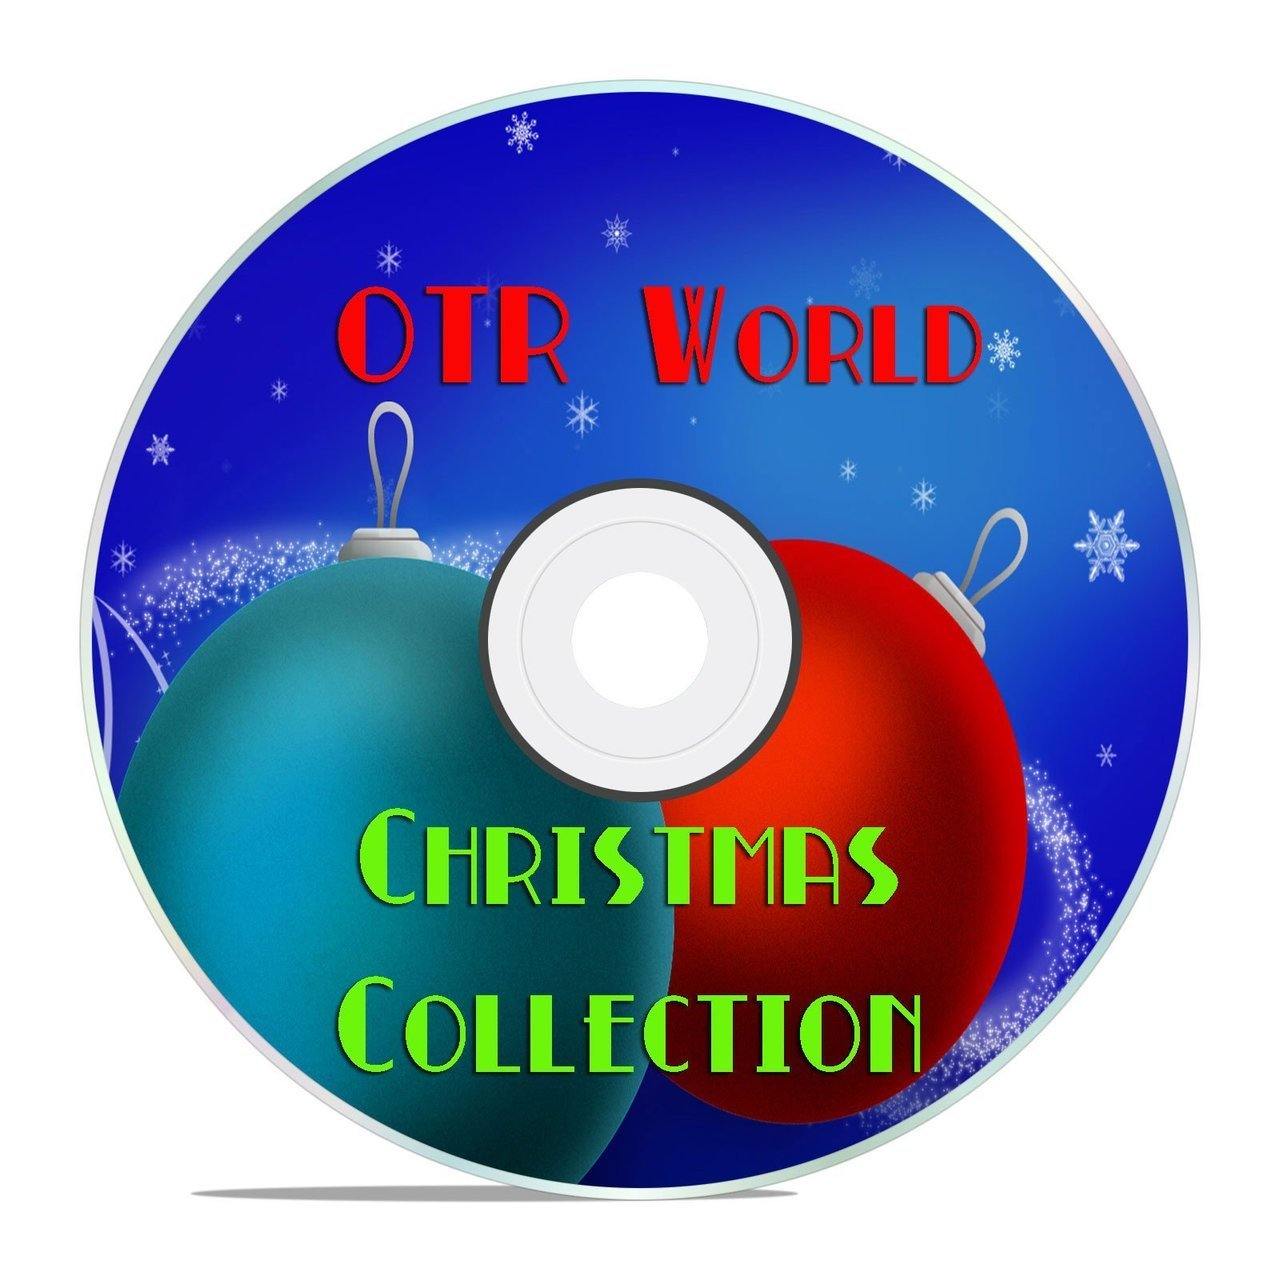 Christmas Collection OTR Old Time Radio Show MP3 On DVD-R Over 500 Episodes - OTR World